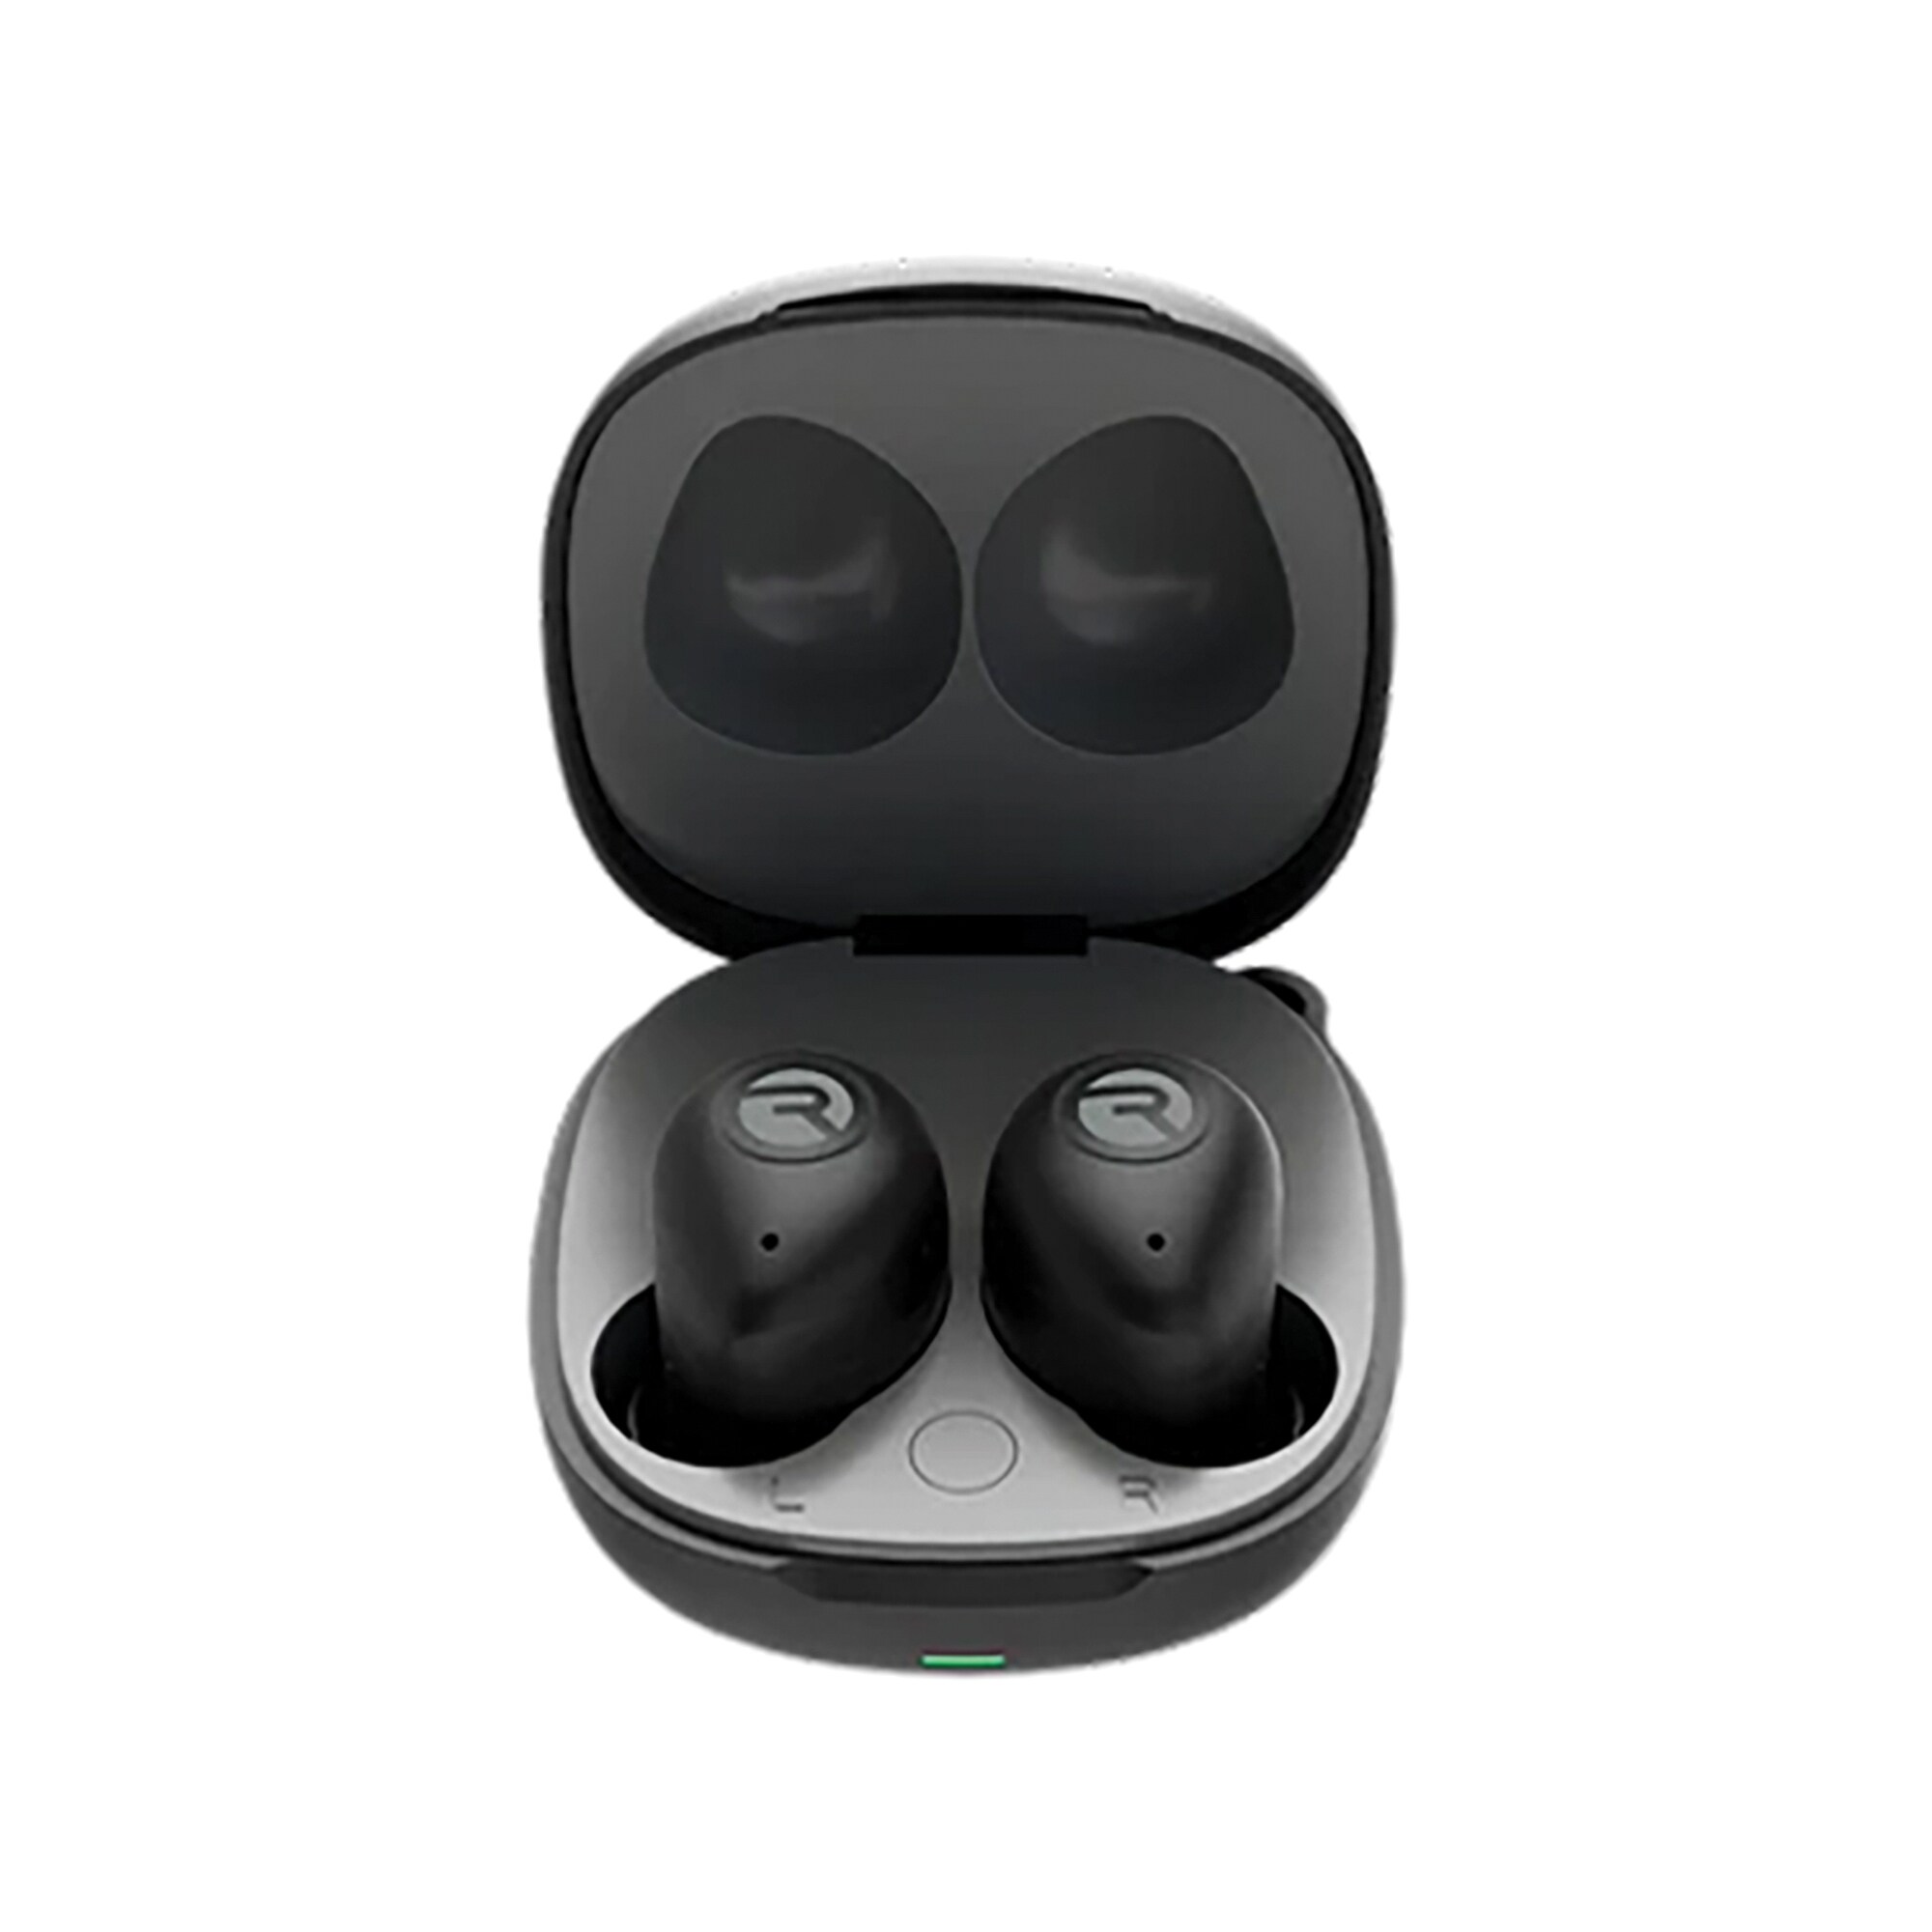 The Impact Earbuds – Raycon